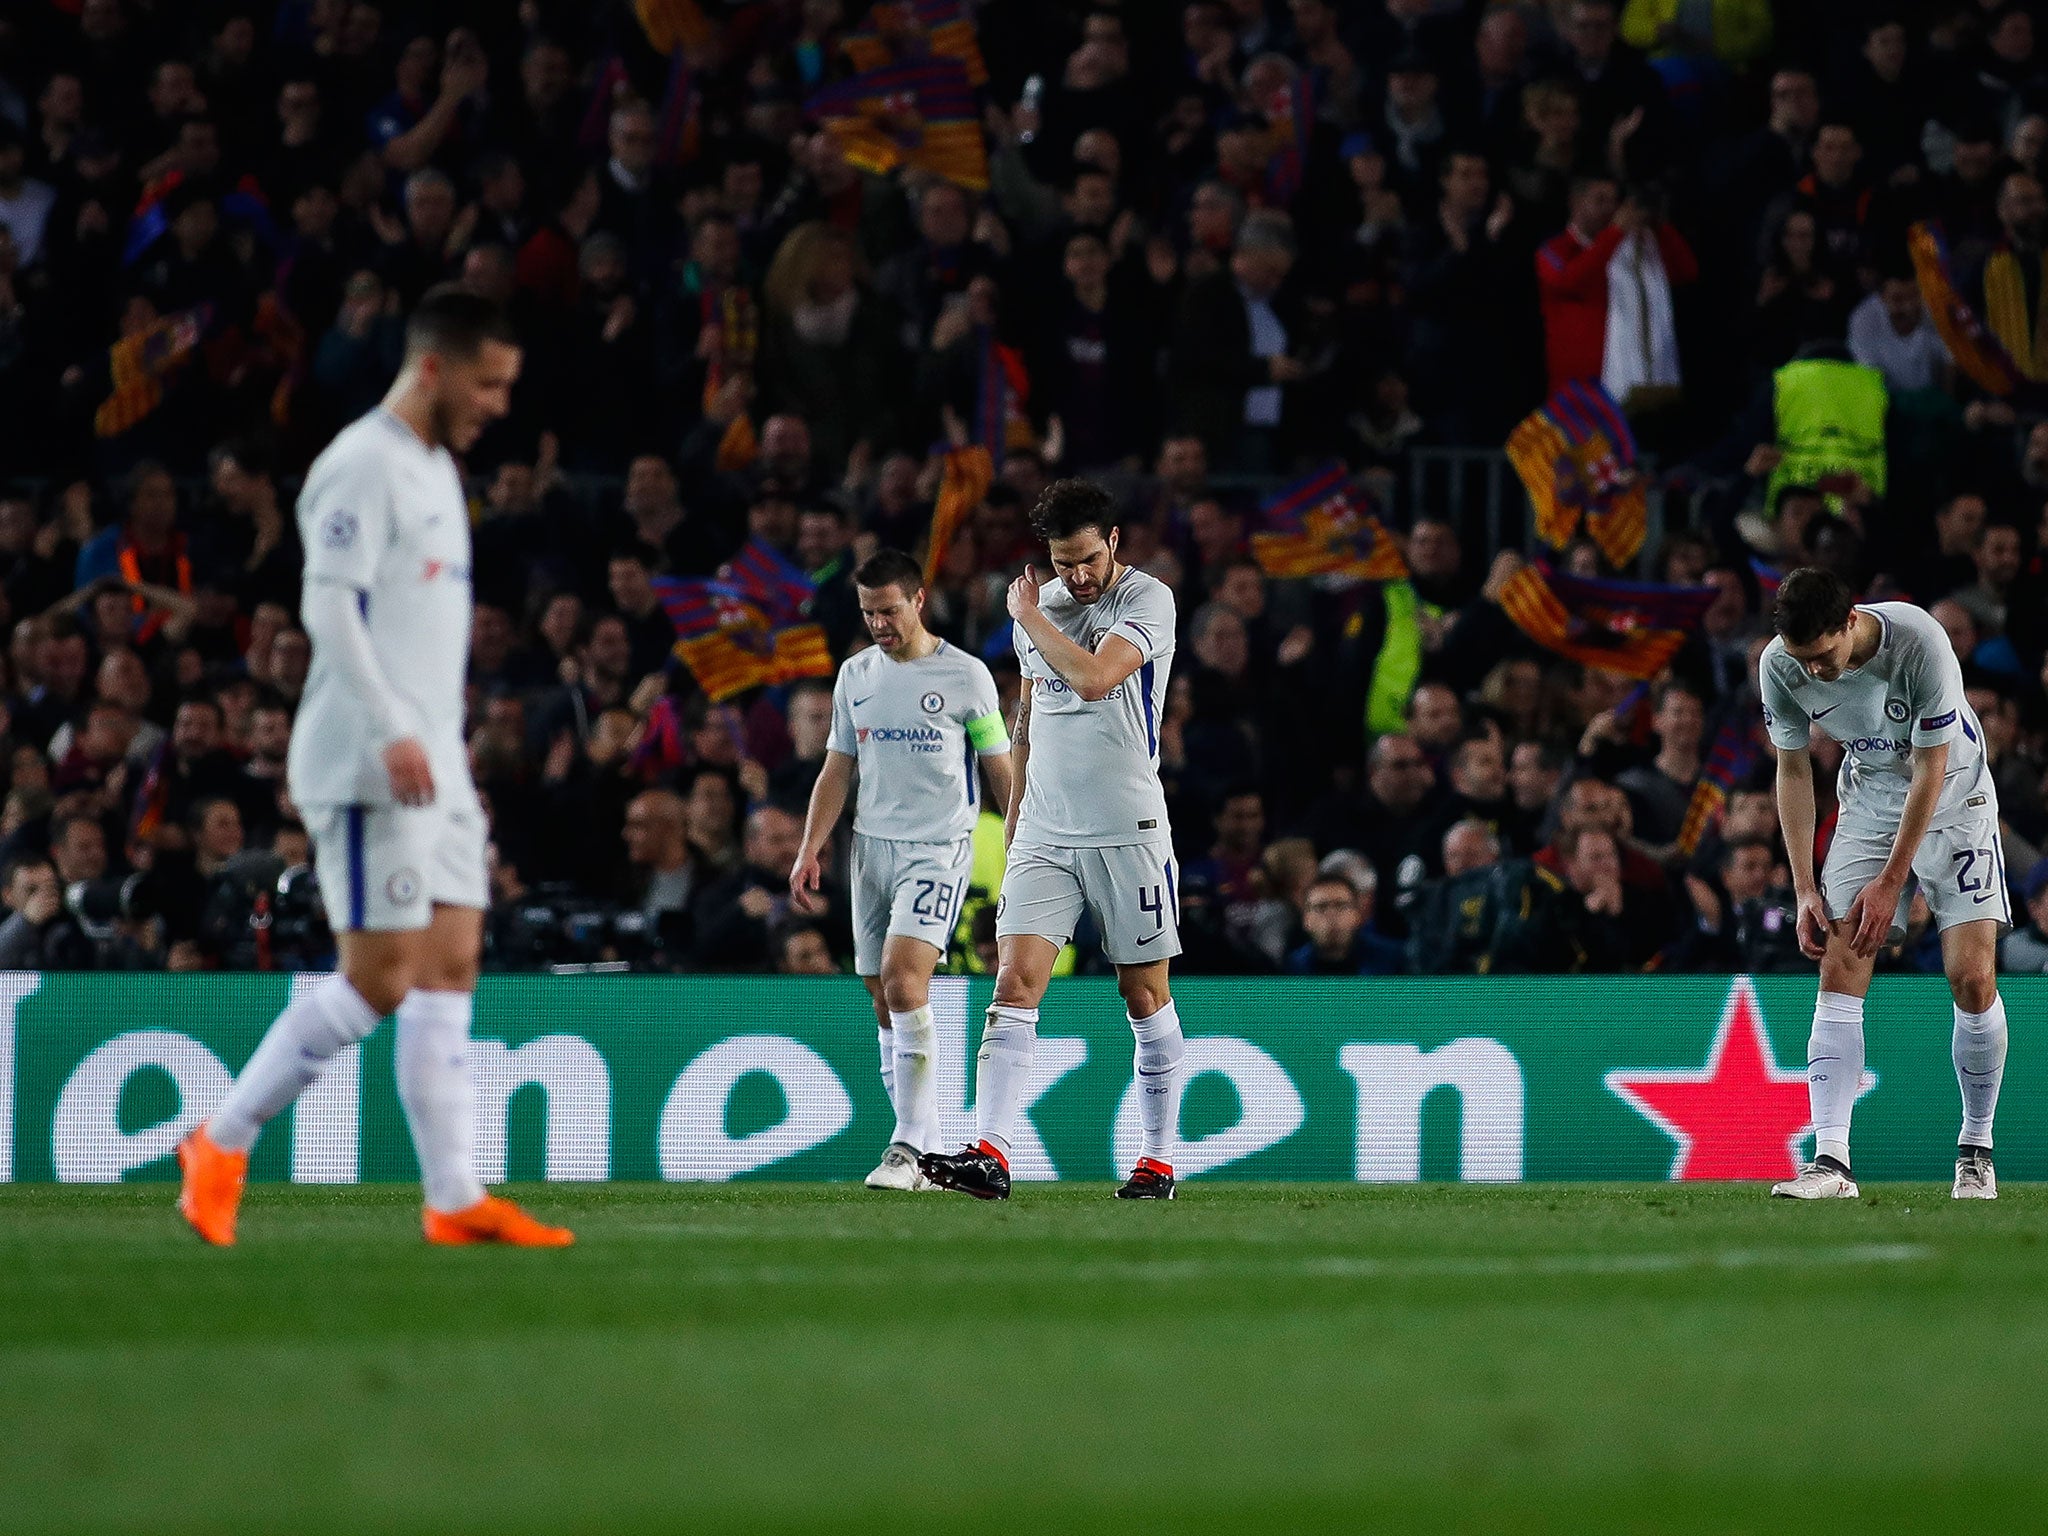 Chelsea's Champions League hopes were brought to an end in Barcelona